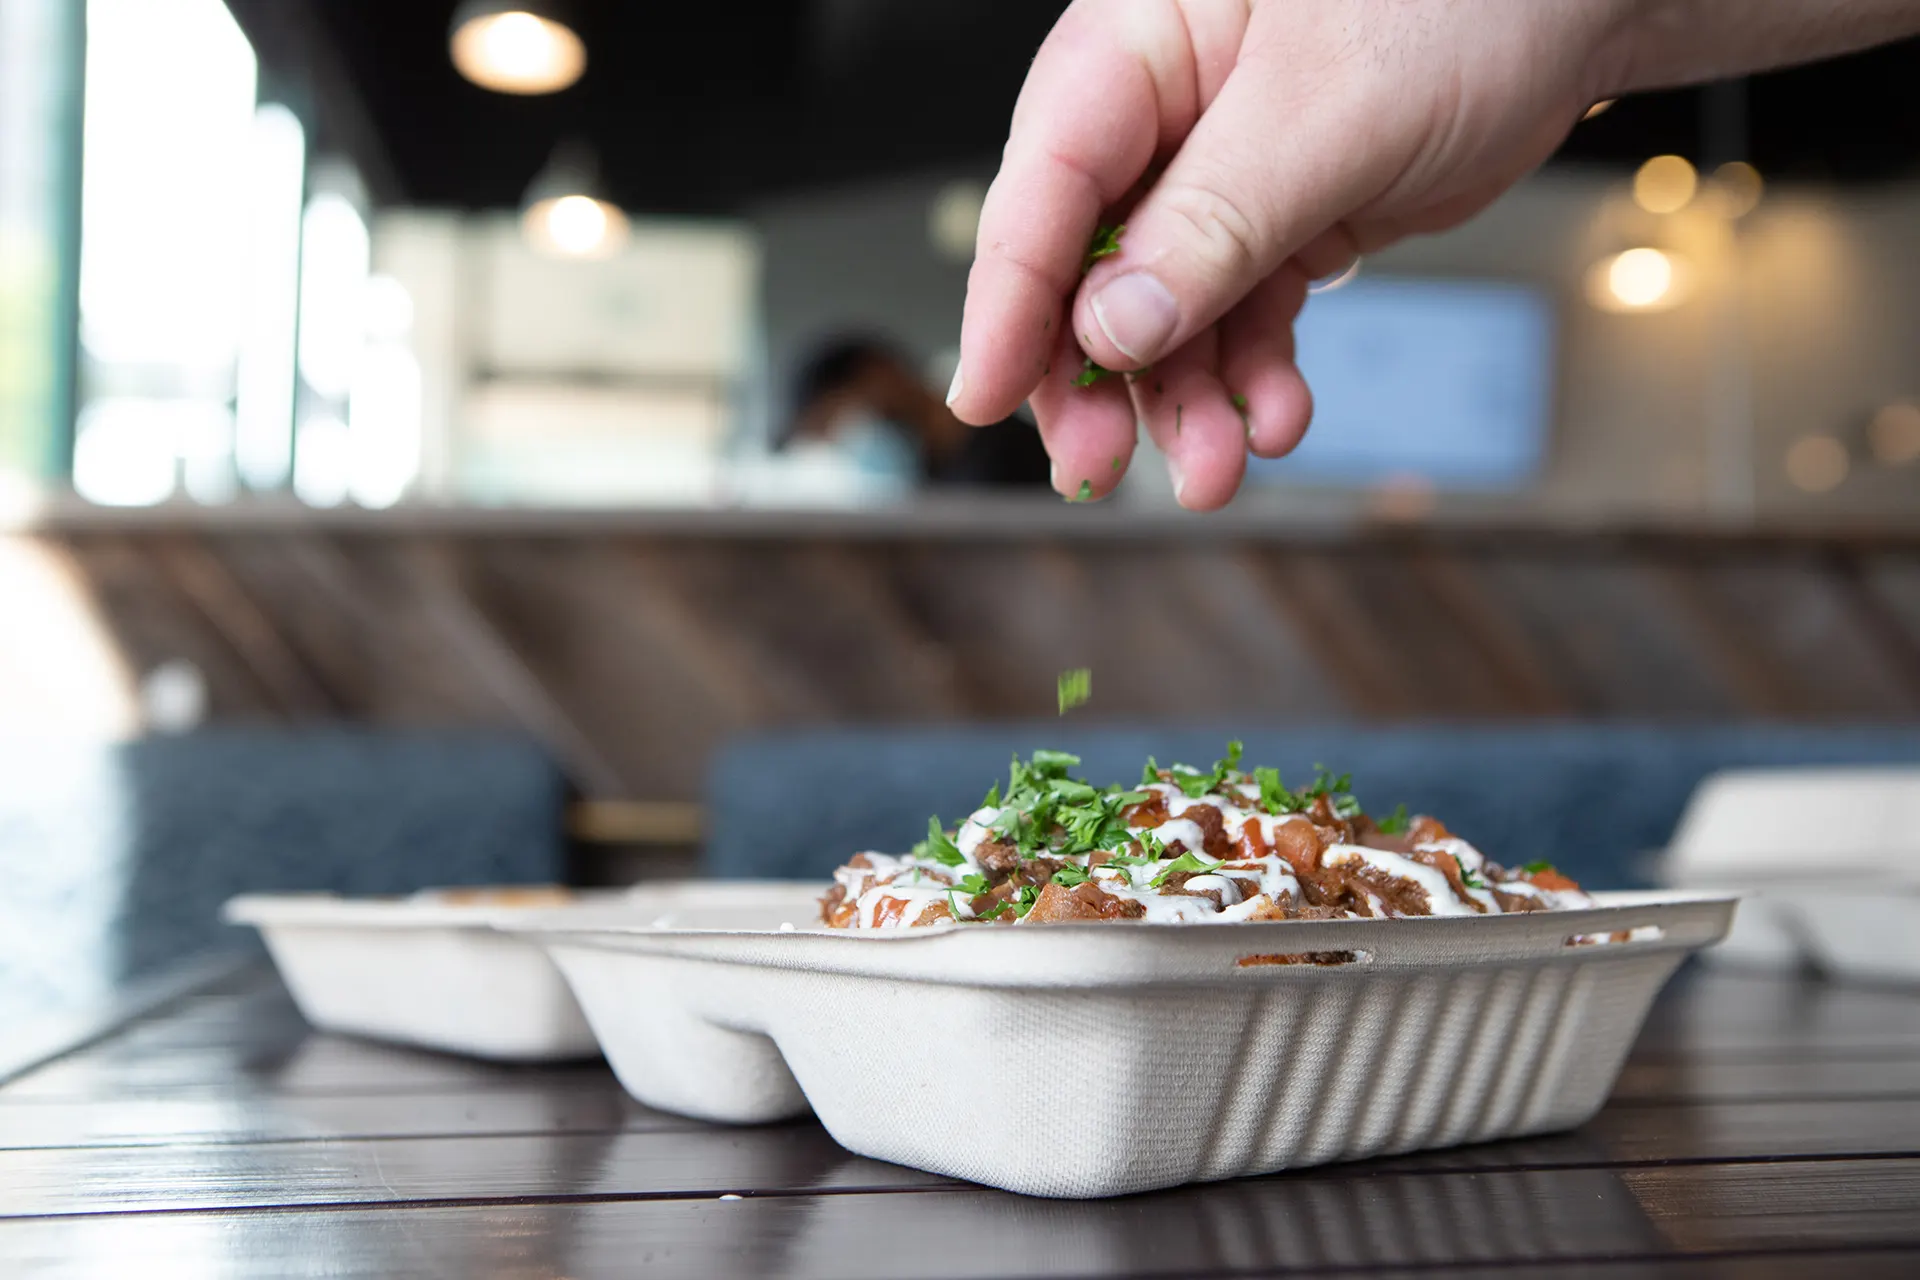 The Chicken Shawarma Nachos platter is pictured from a side profile in the Hummus Labs restaurant. The platter is set on top of a black metallic table with the restaurant's blue cushions and wood booth visible in the background. Chef Joseph Badaro’s hand is shown sprinkling fresh cut parsley over the Shawarma Nachos.